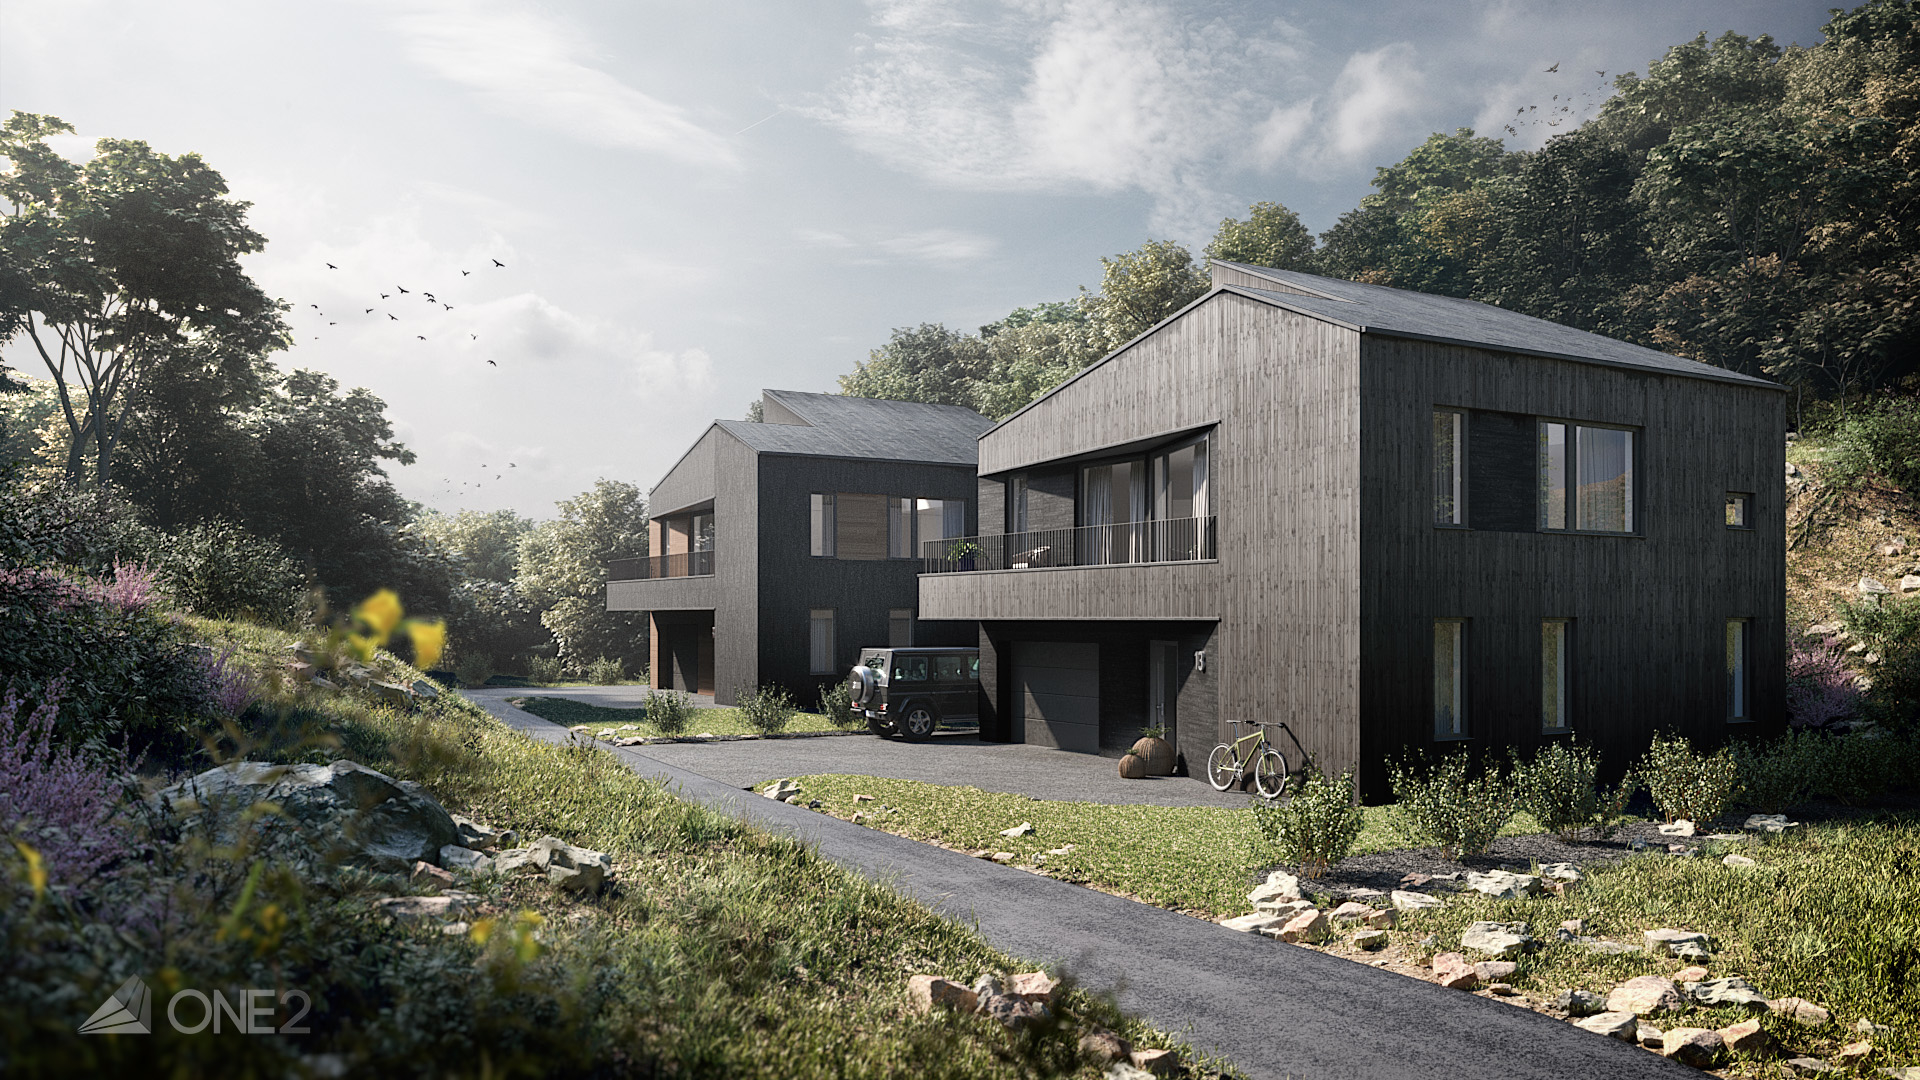 d photoshop ds max corona renderer forest pack quixel megascans itoo software wood house  krpysz